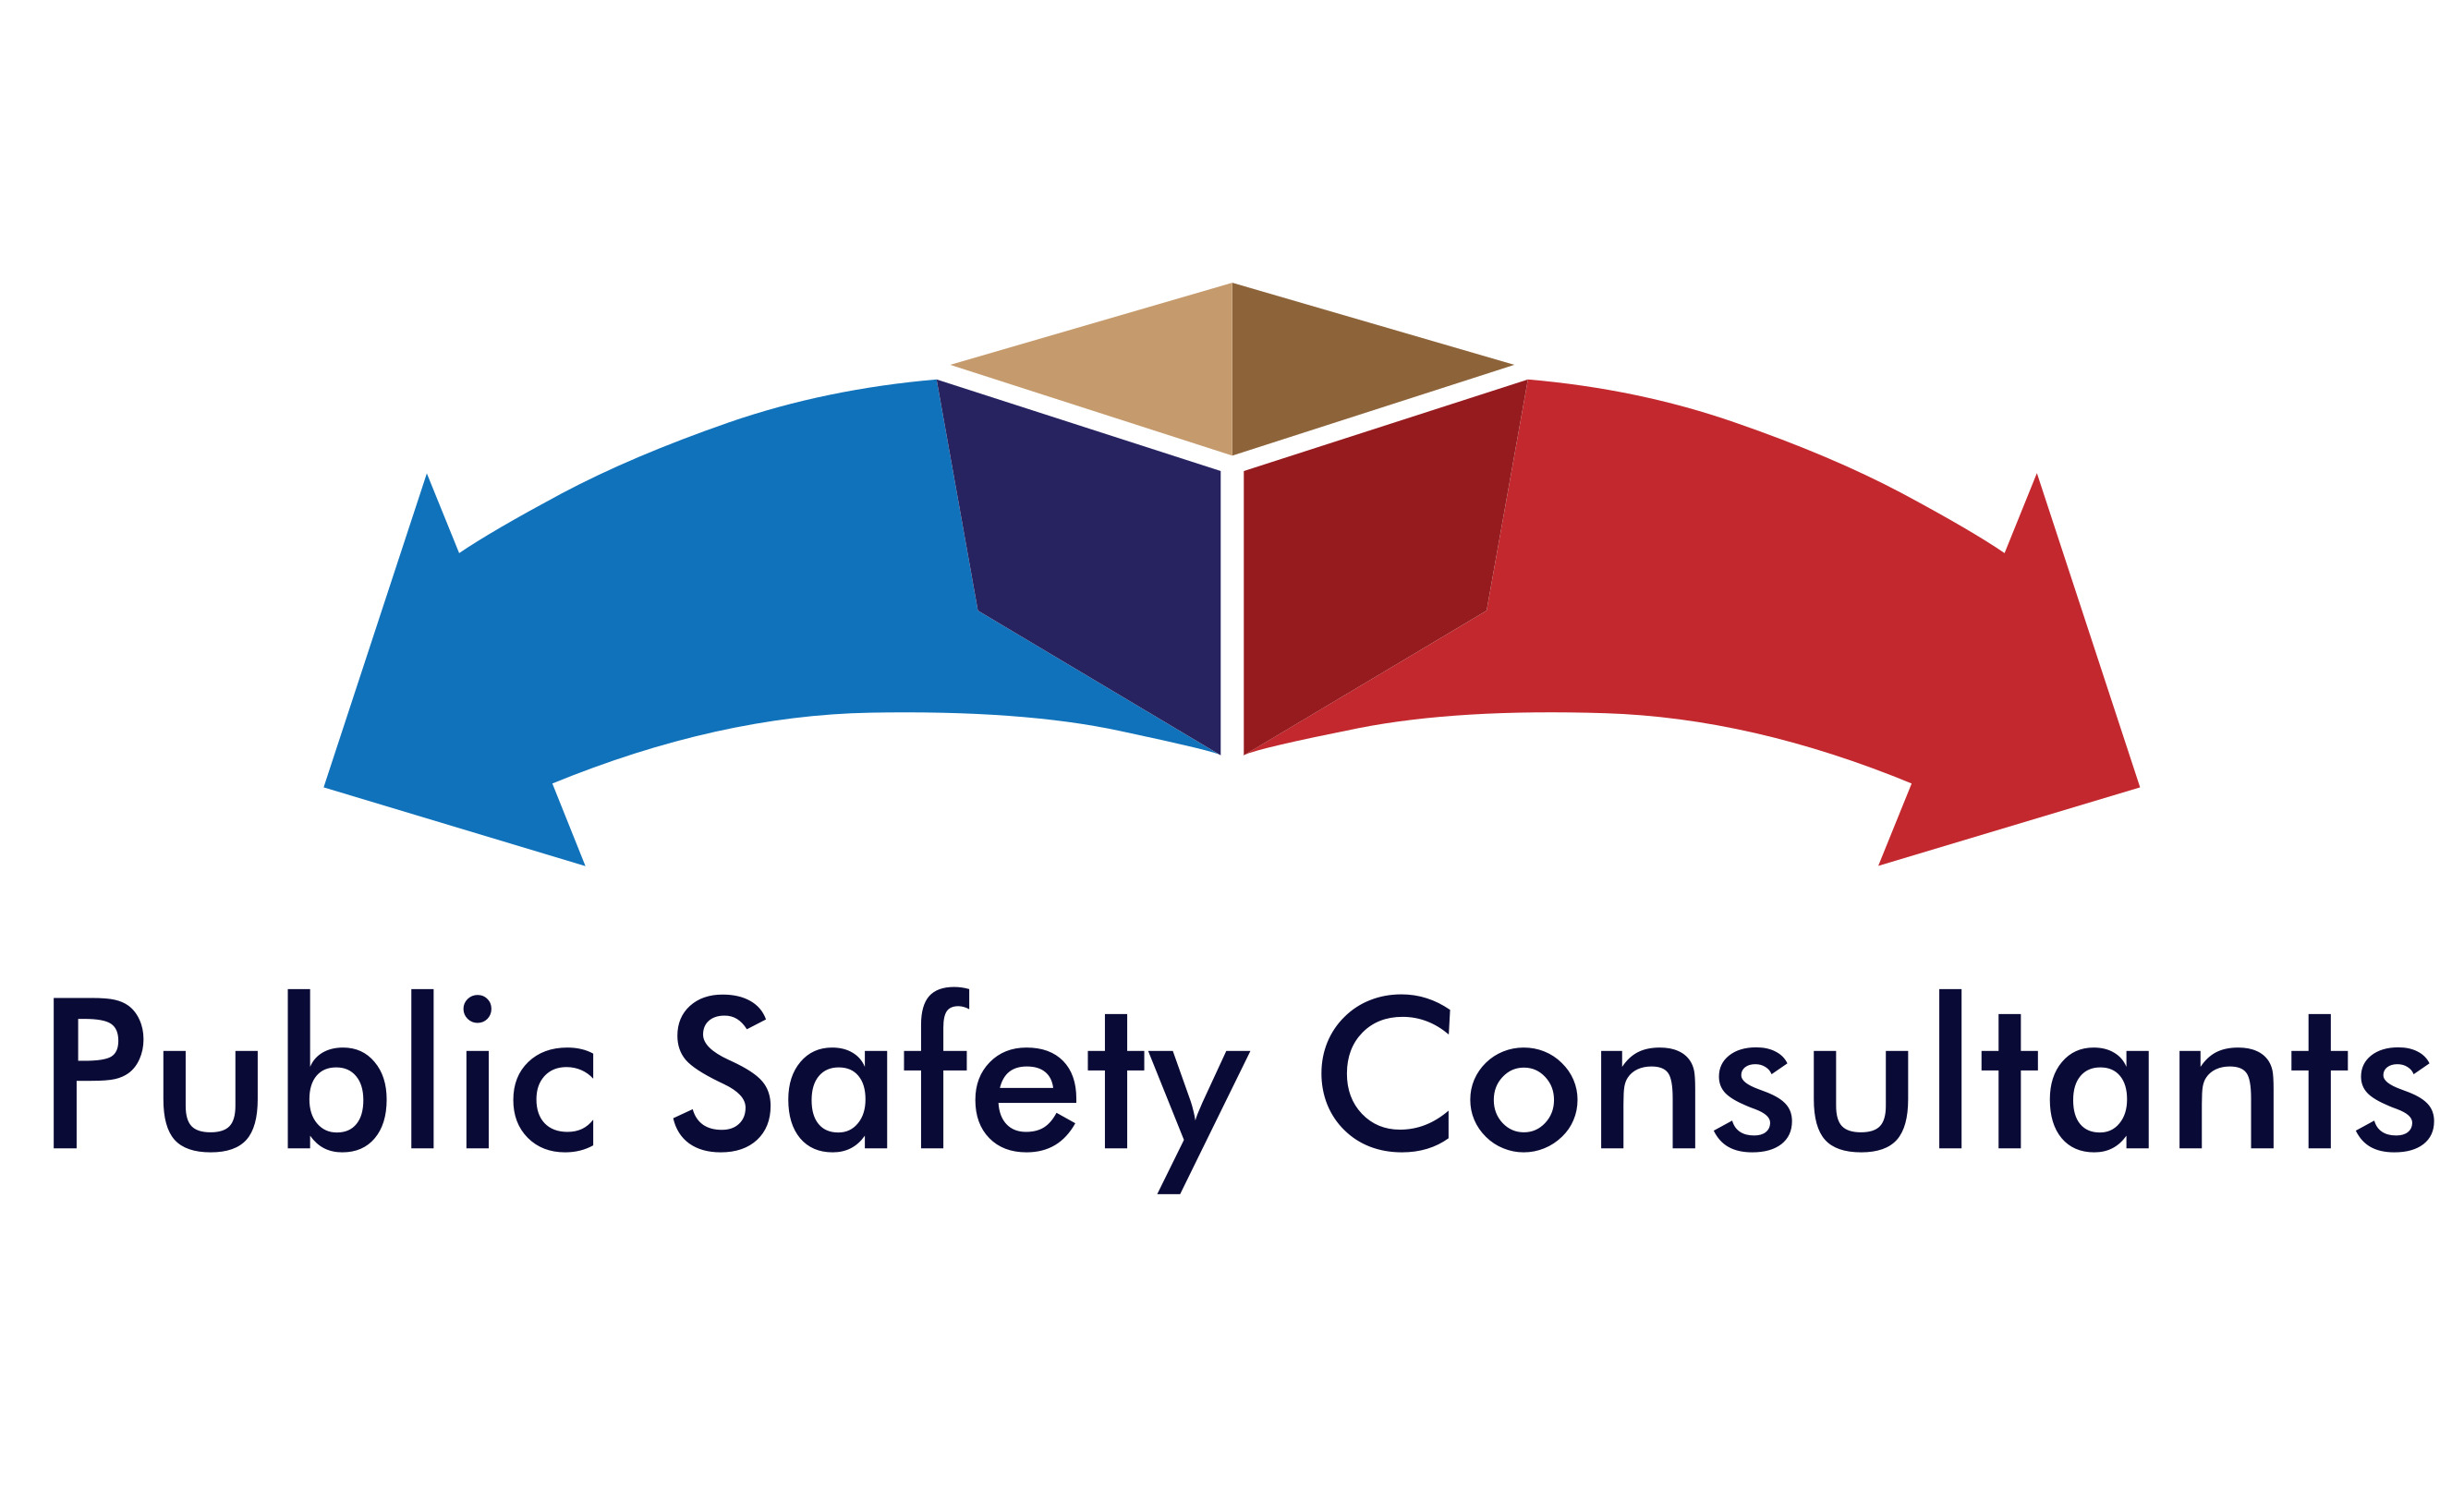 Public Safety Consultants